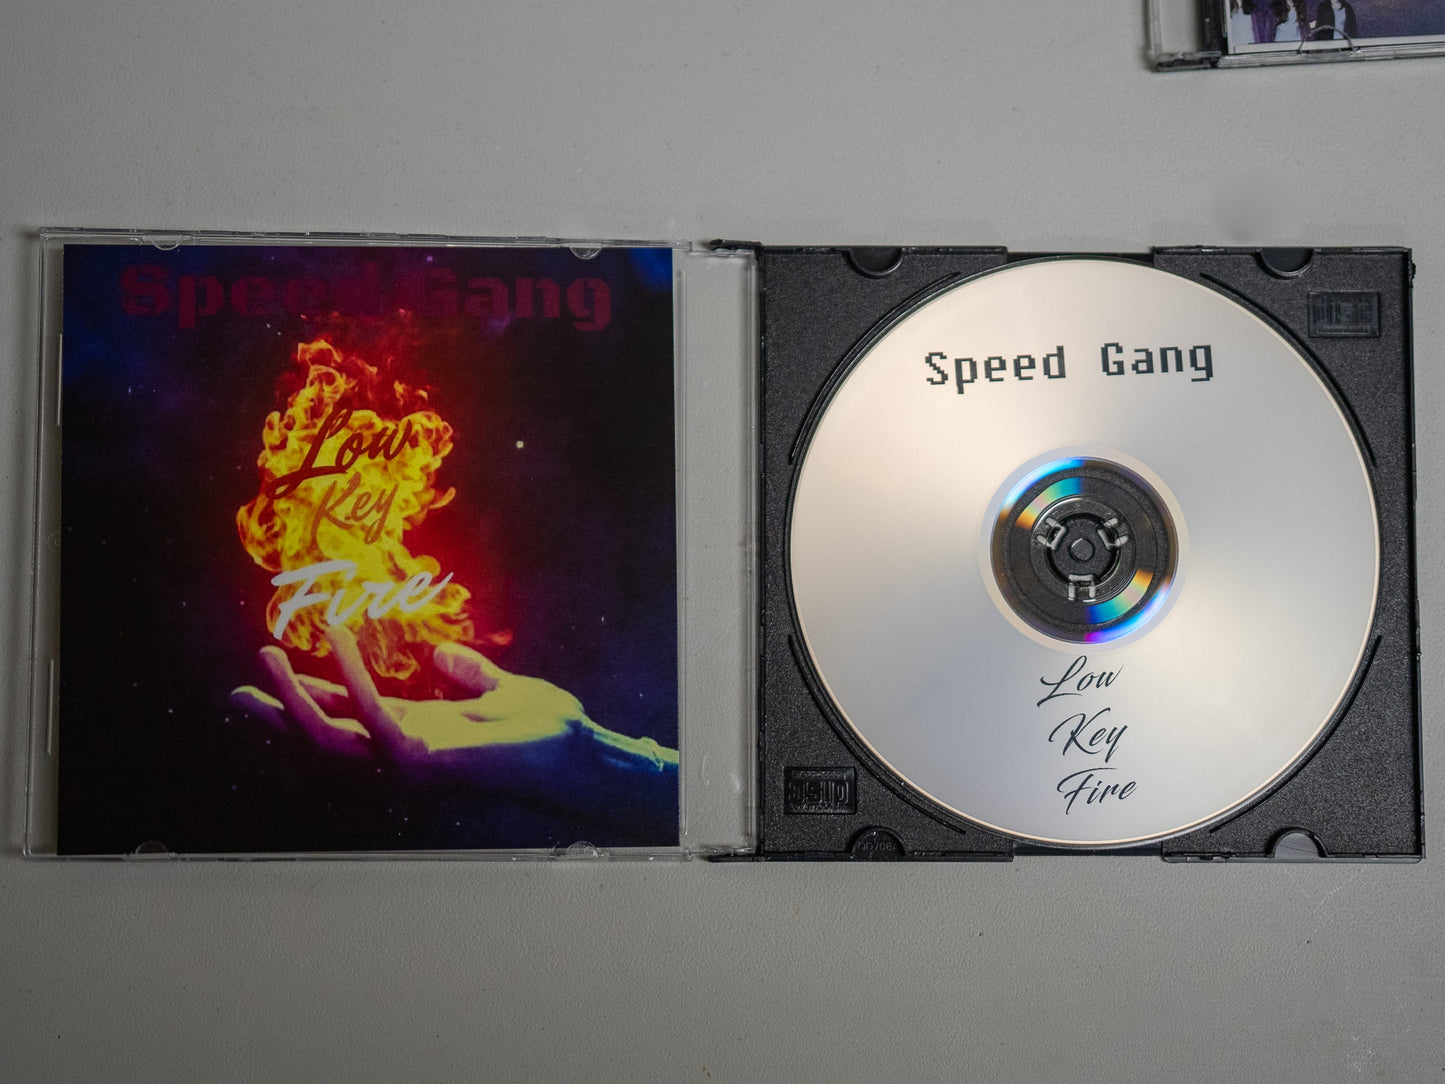 Speed Gang "Low Key Fire" [2016] Physical CD